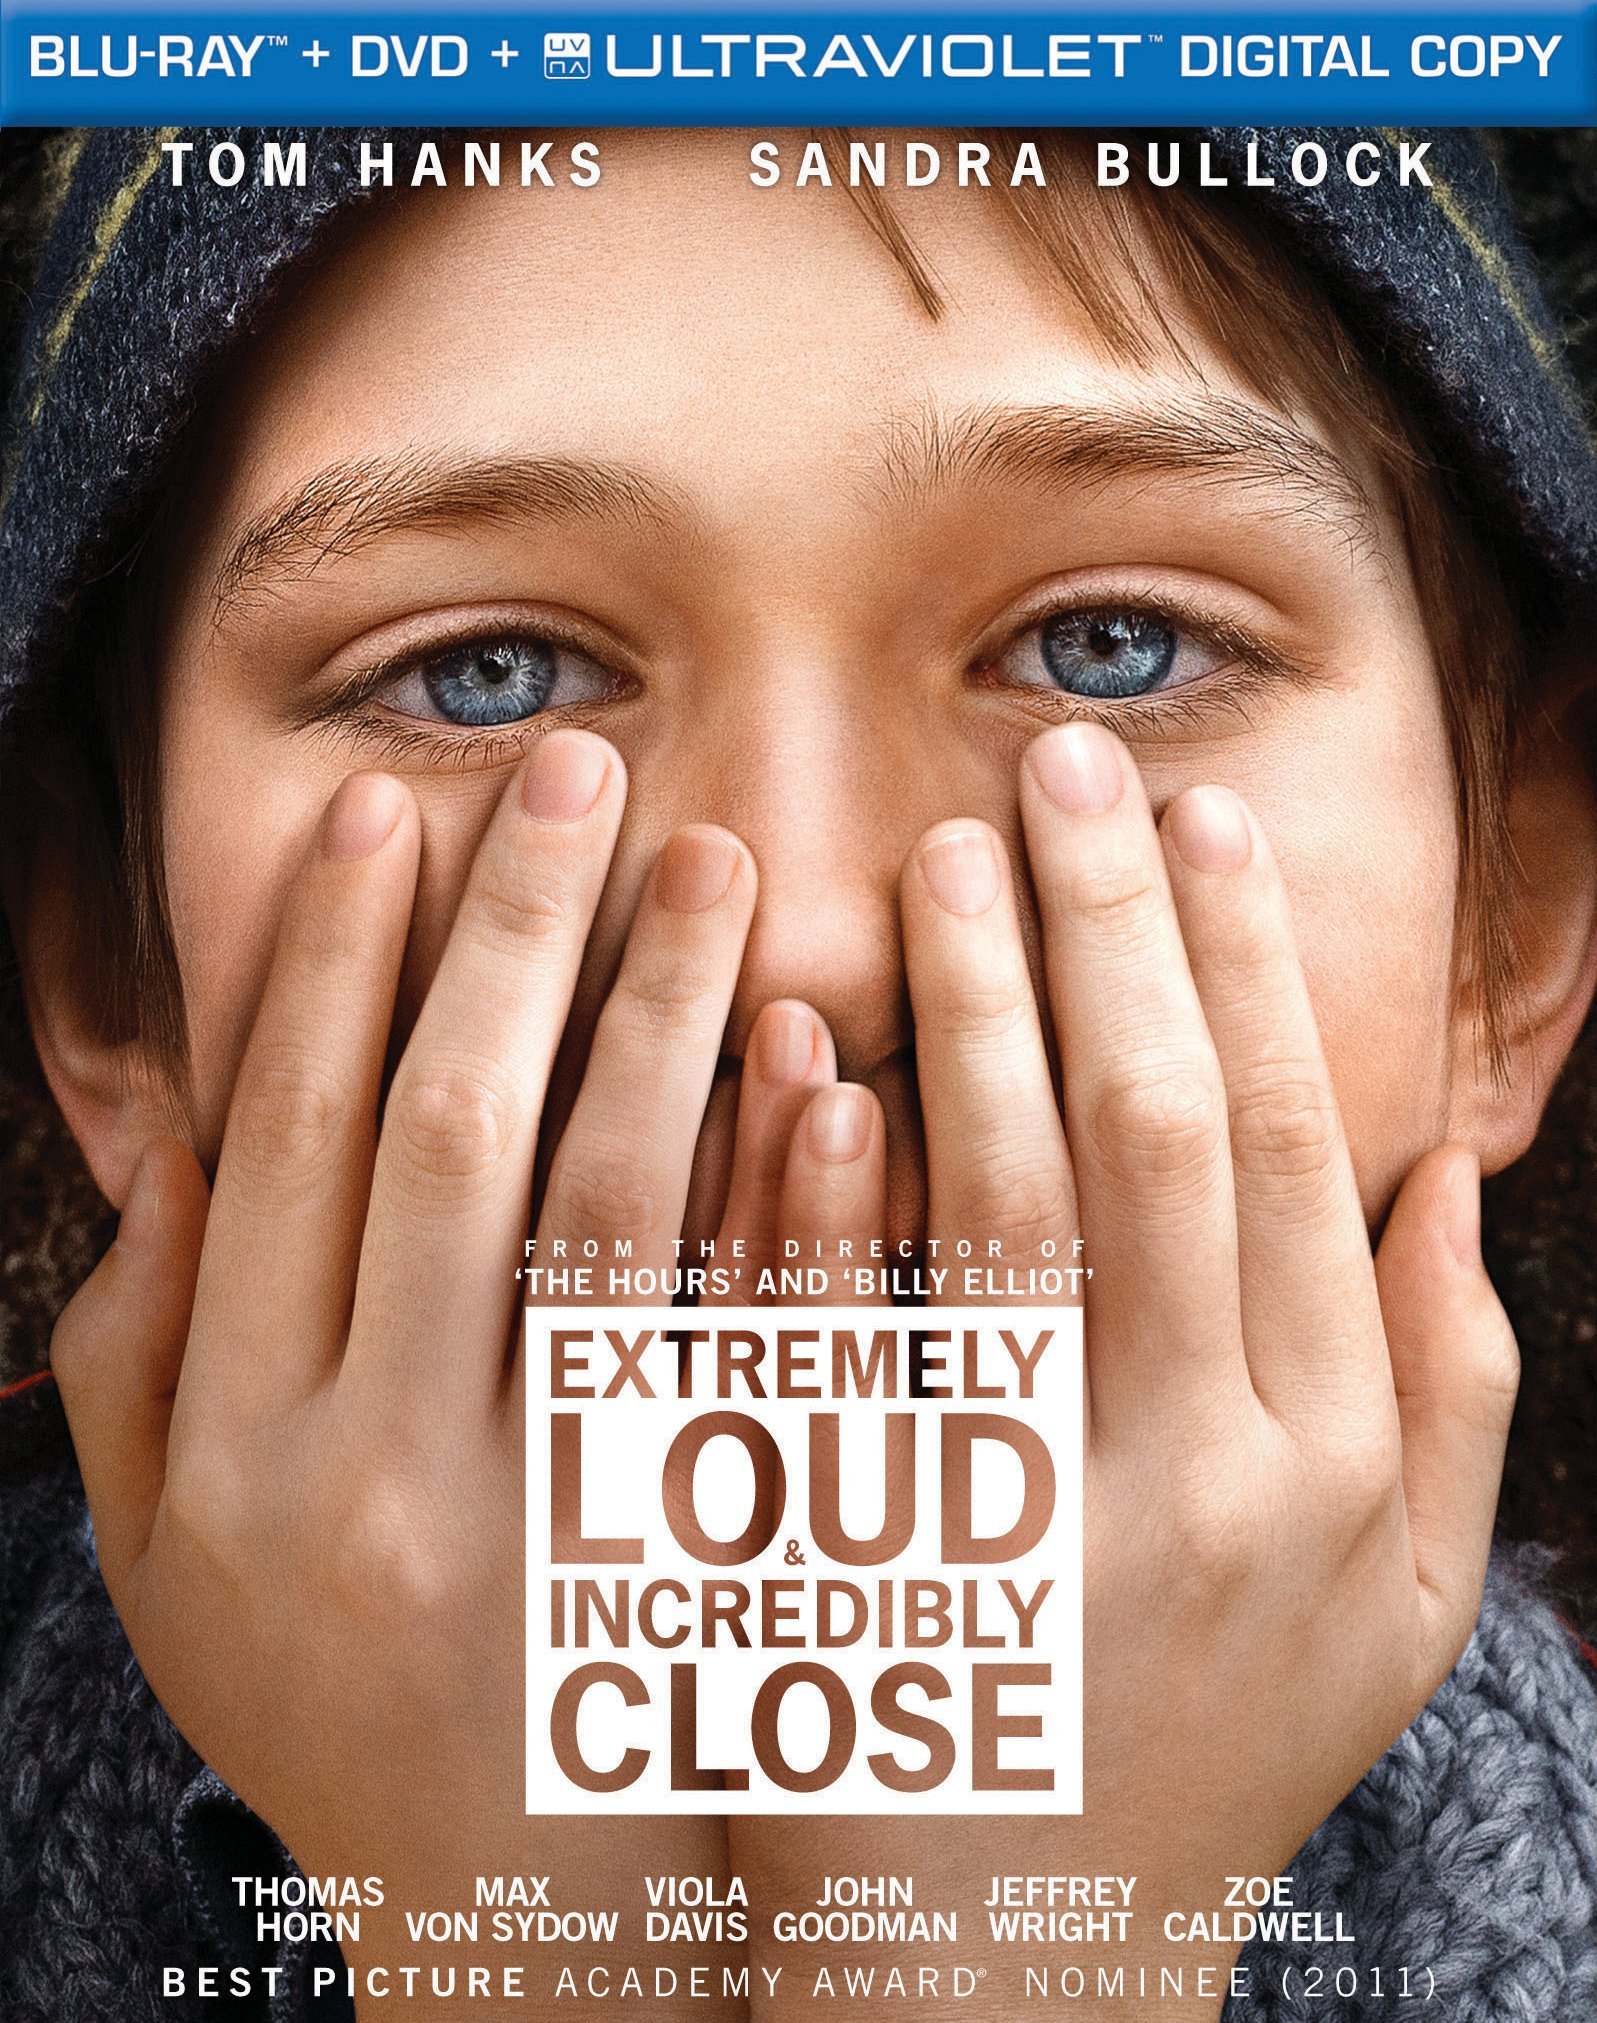 Extremely Loud & Incredibly Close Available on Blu-ray/DVD March 27th